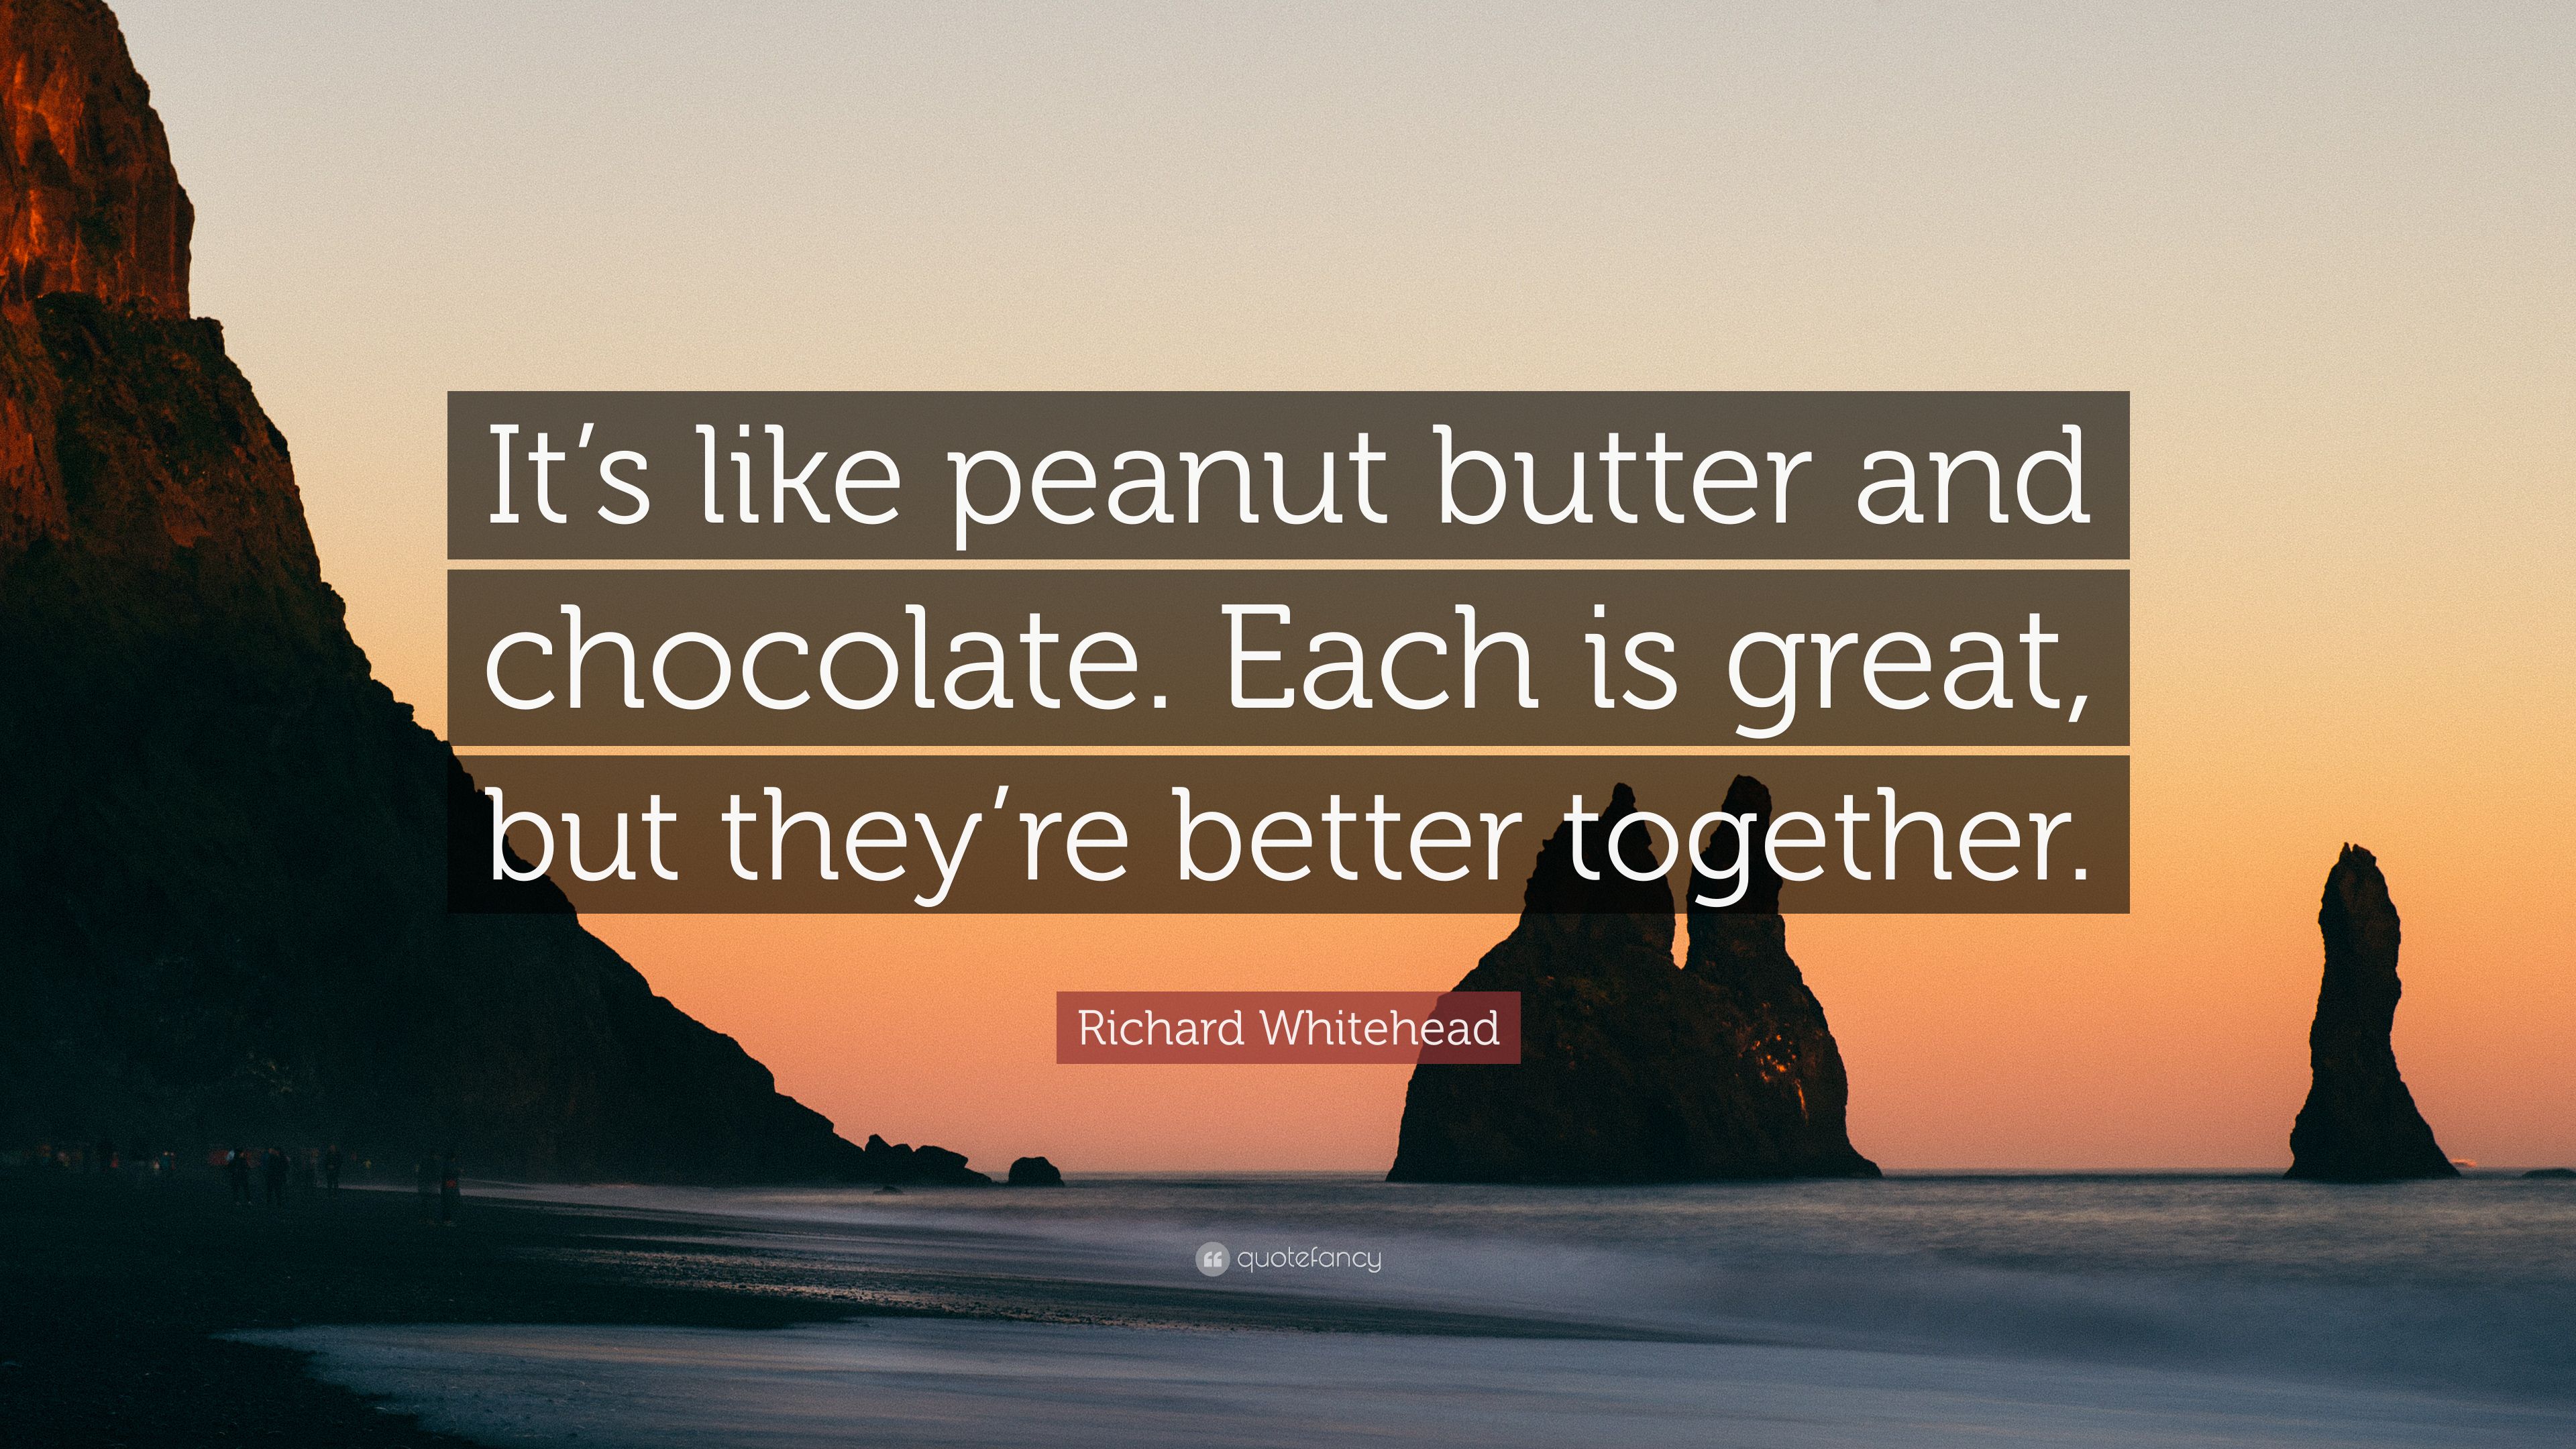 Richard Whitehead Quote: “It's like peanut butter and chocolate